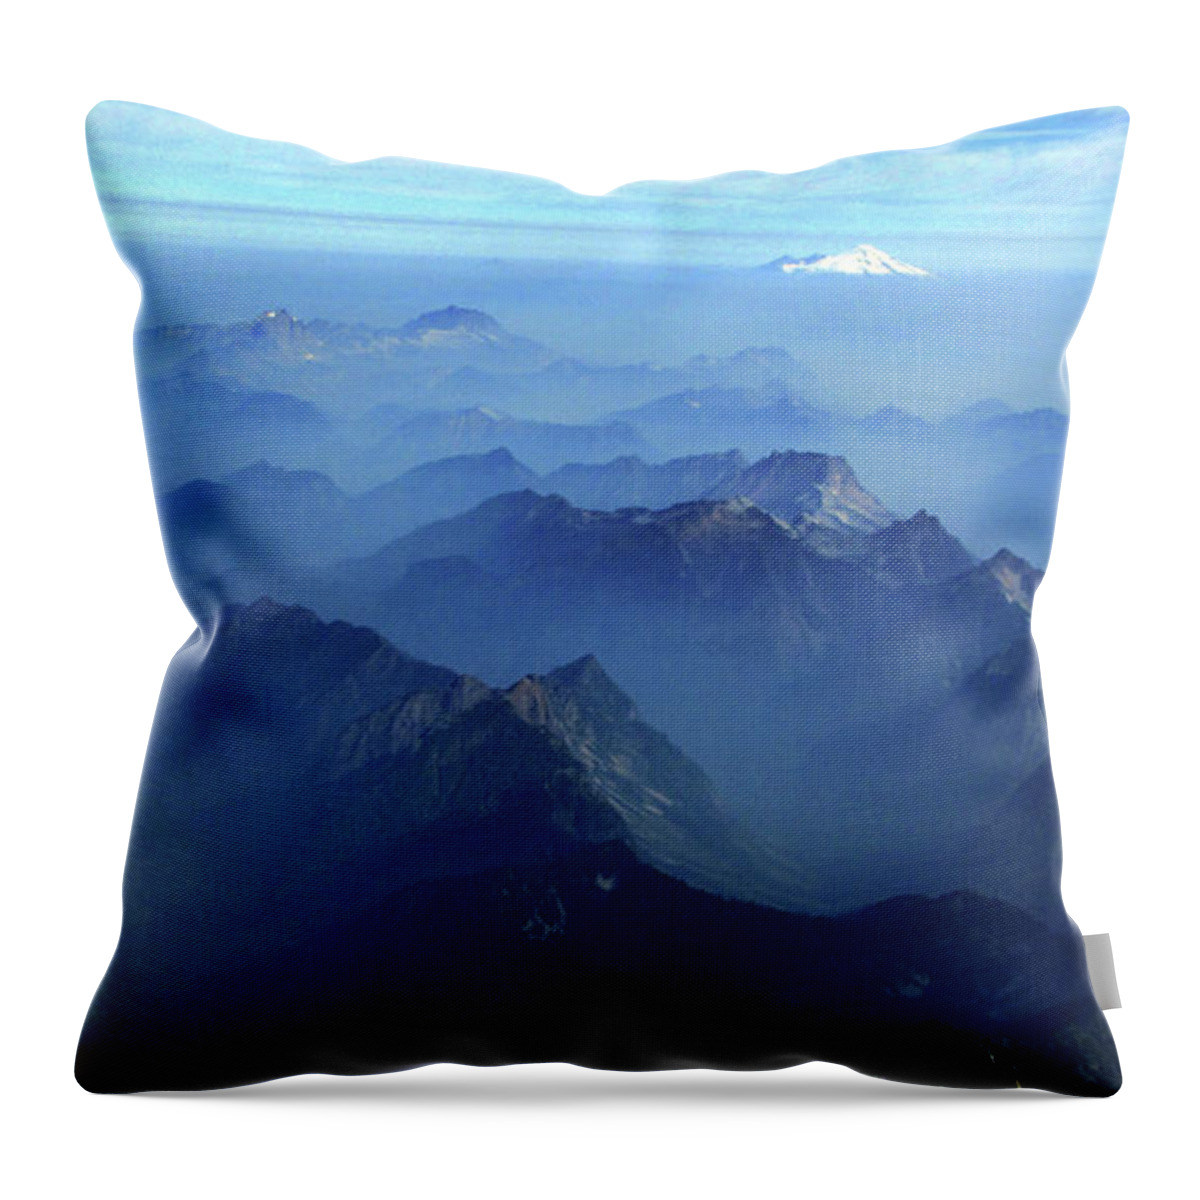  Throw Pillow featuring the digital art Rockies by Darcy Dietrich